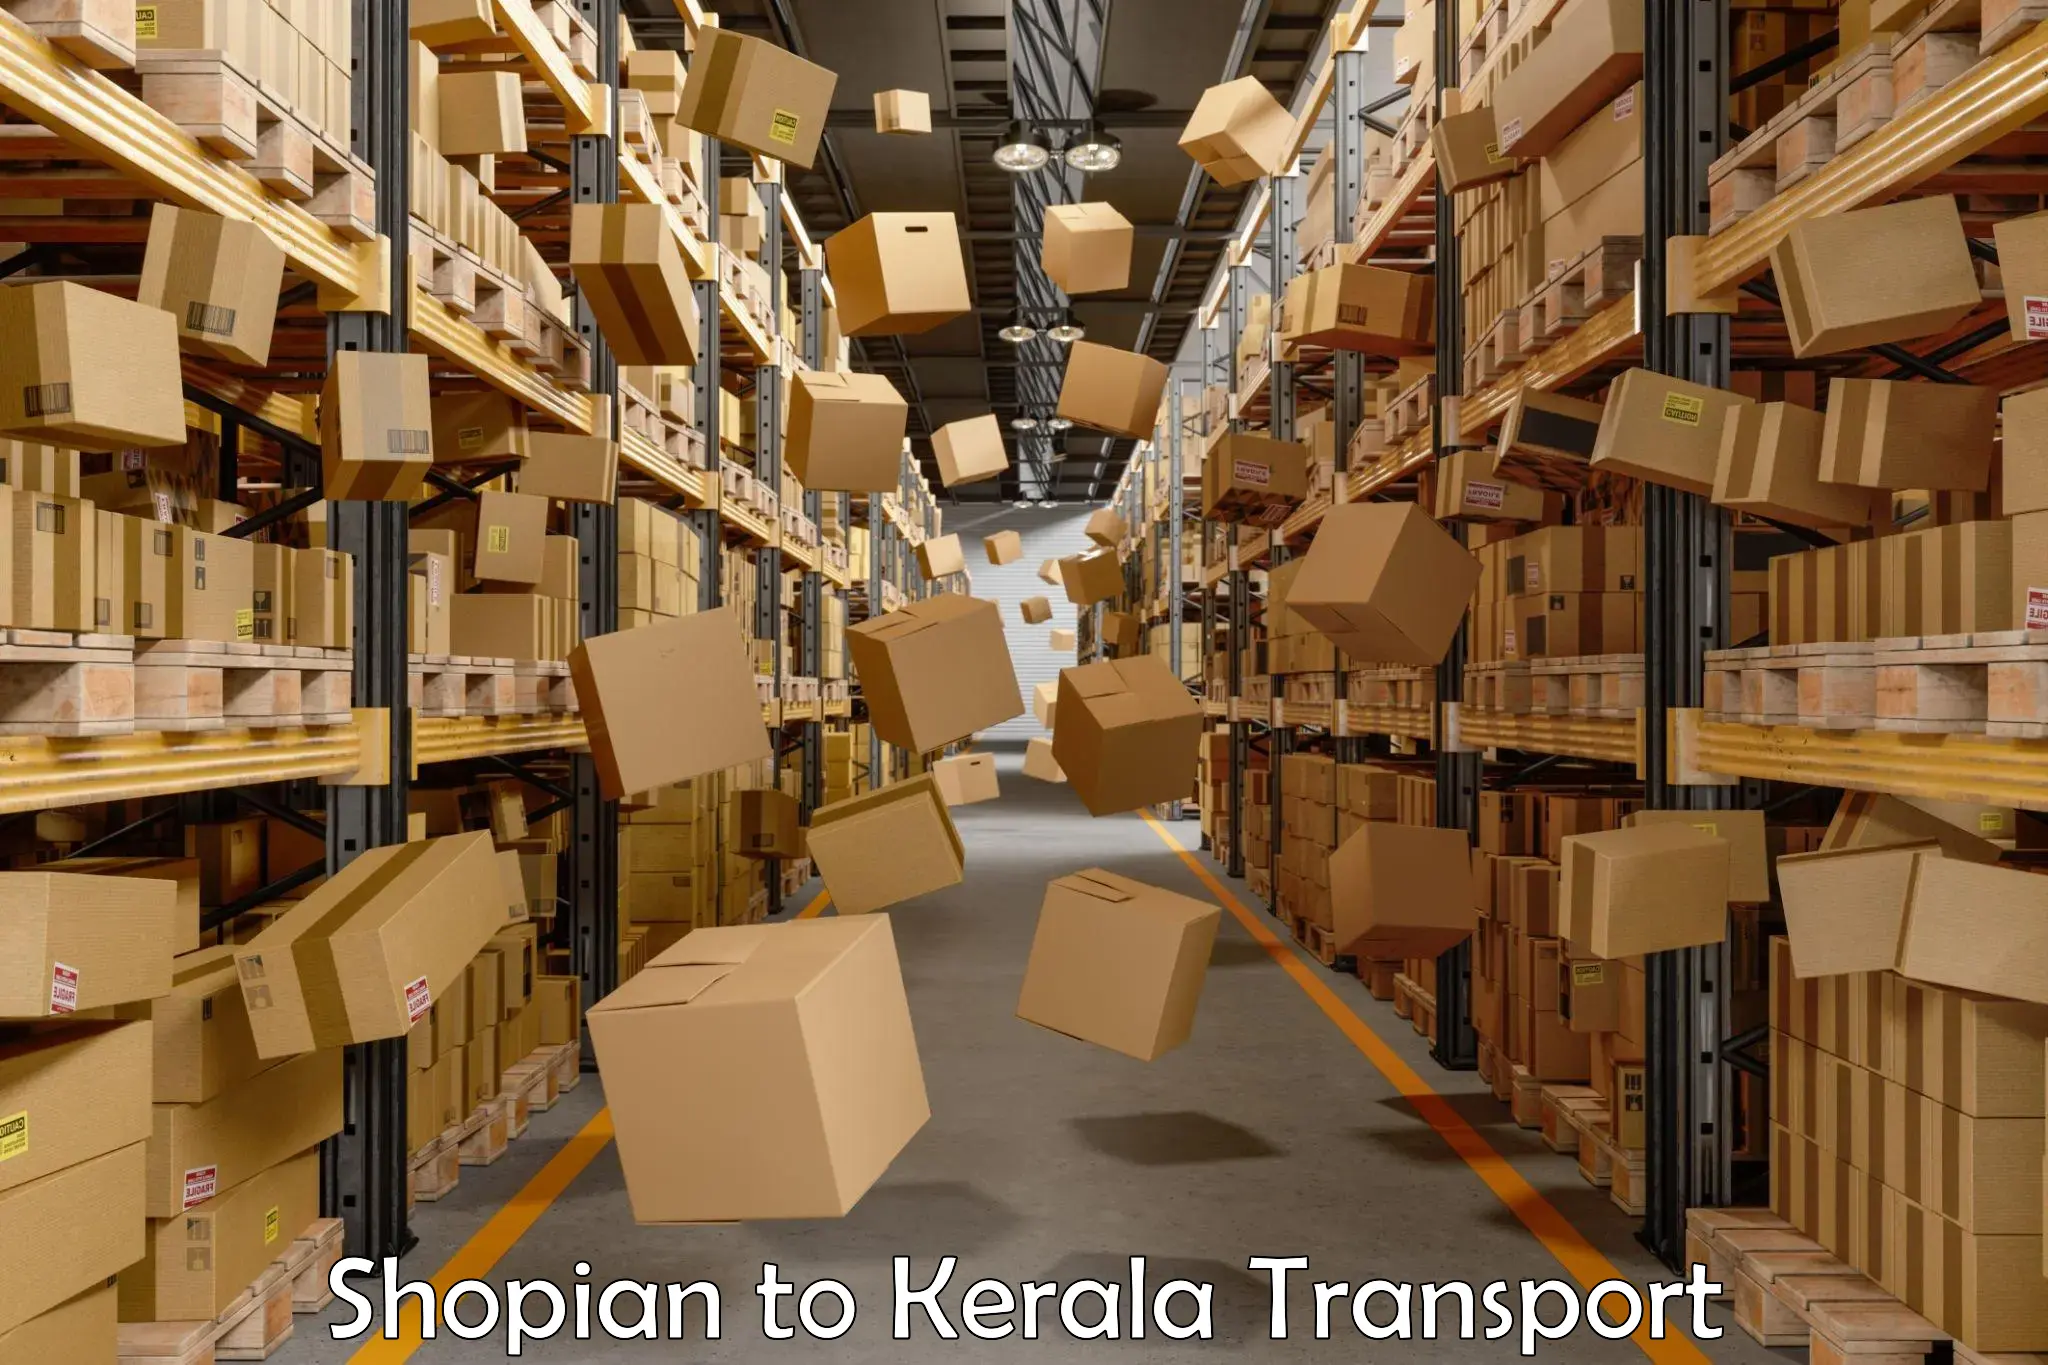 Nearby transport service Shopian to Trivandrum